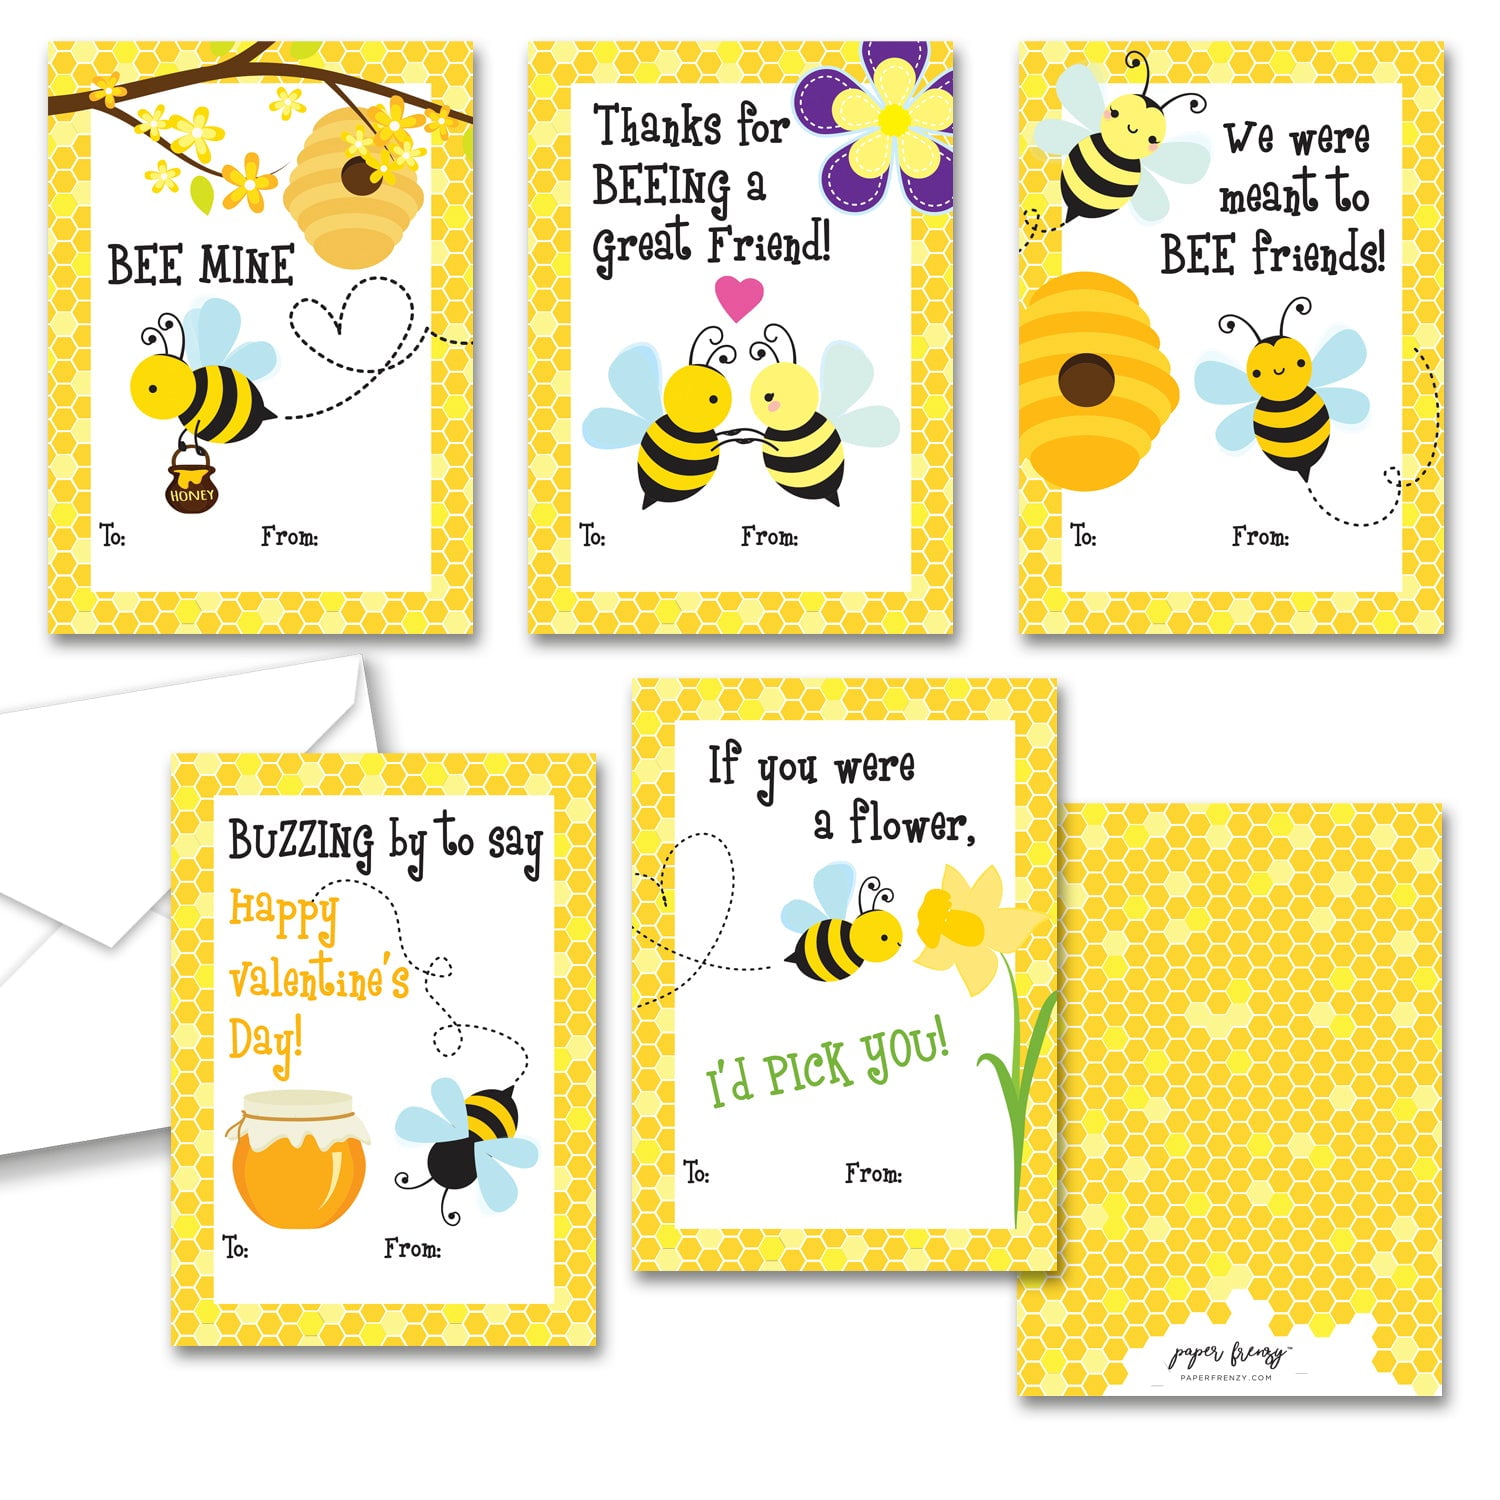 Bee Mine Printable Valentine Gift Tag Cards - For the Love of Food